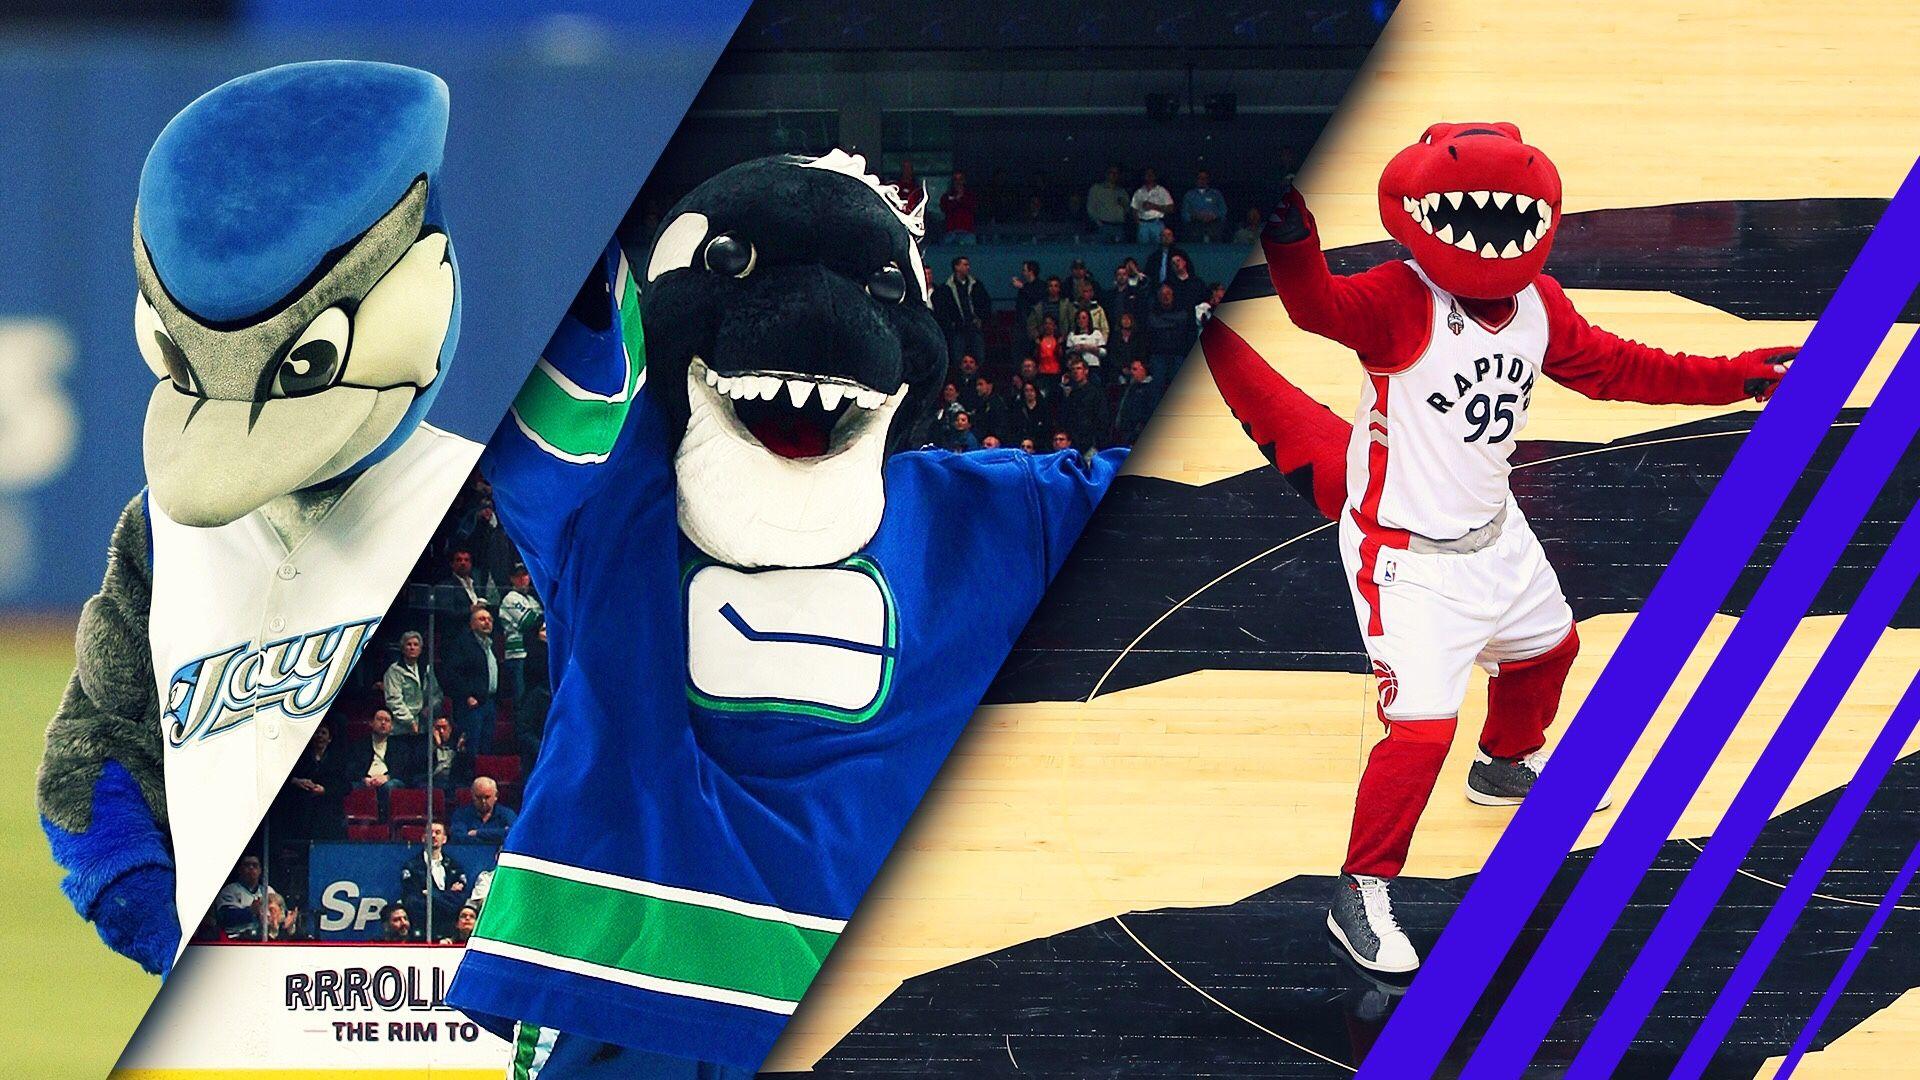 From The Raptor to Mick E. Moose: Canadian team mascots ranked